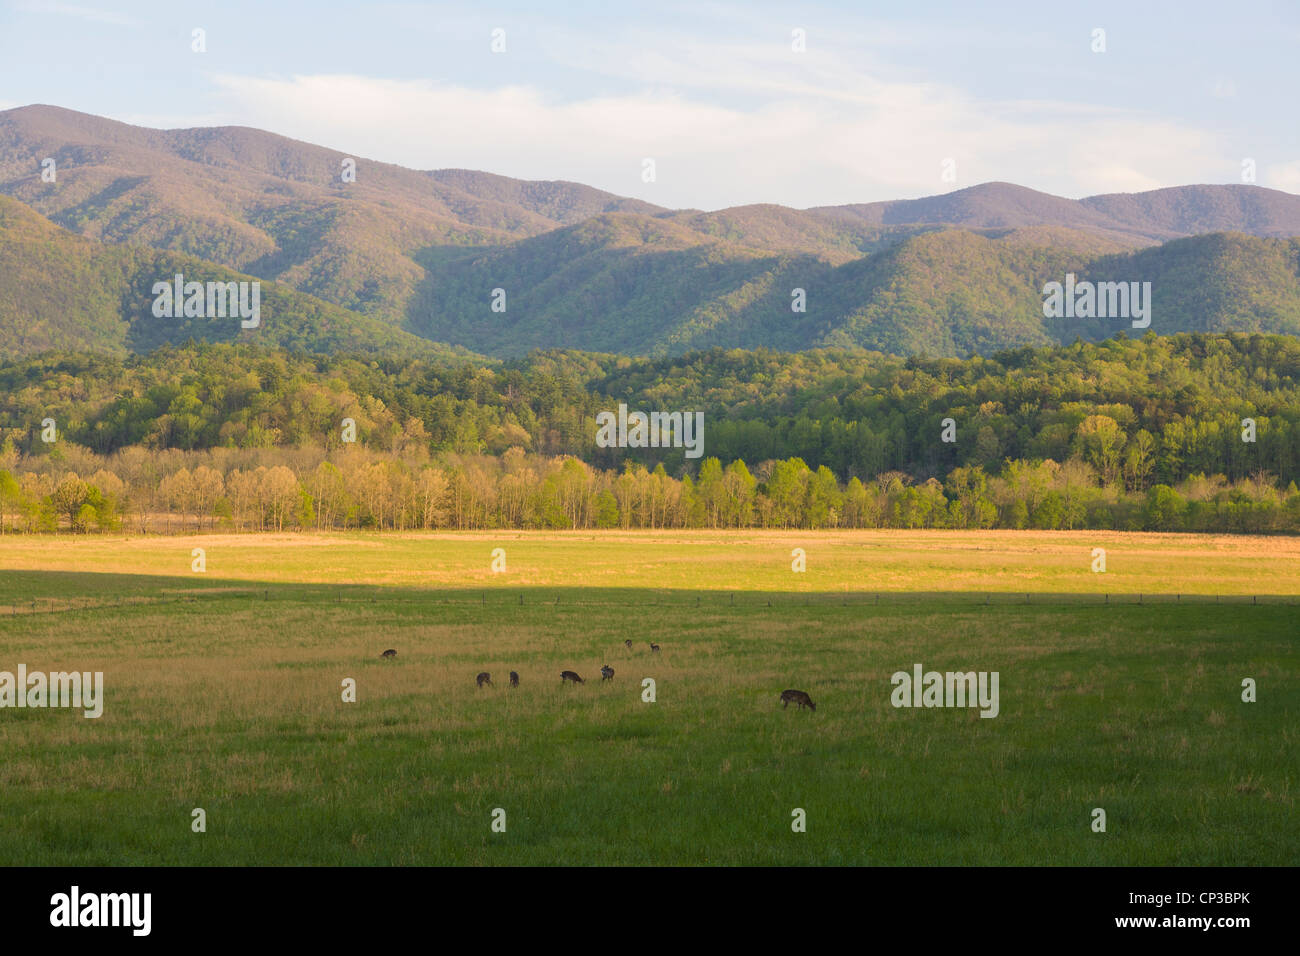 Hirsche im Tal in Cades Cove im Nationalpark Great Smoky Mountains in Tennessee Stockfoto